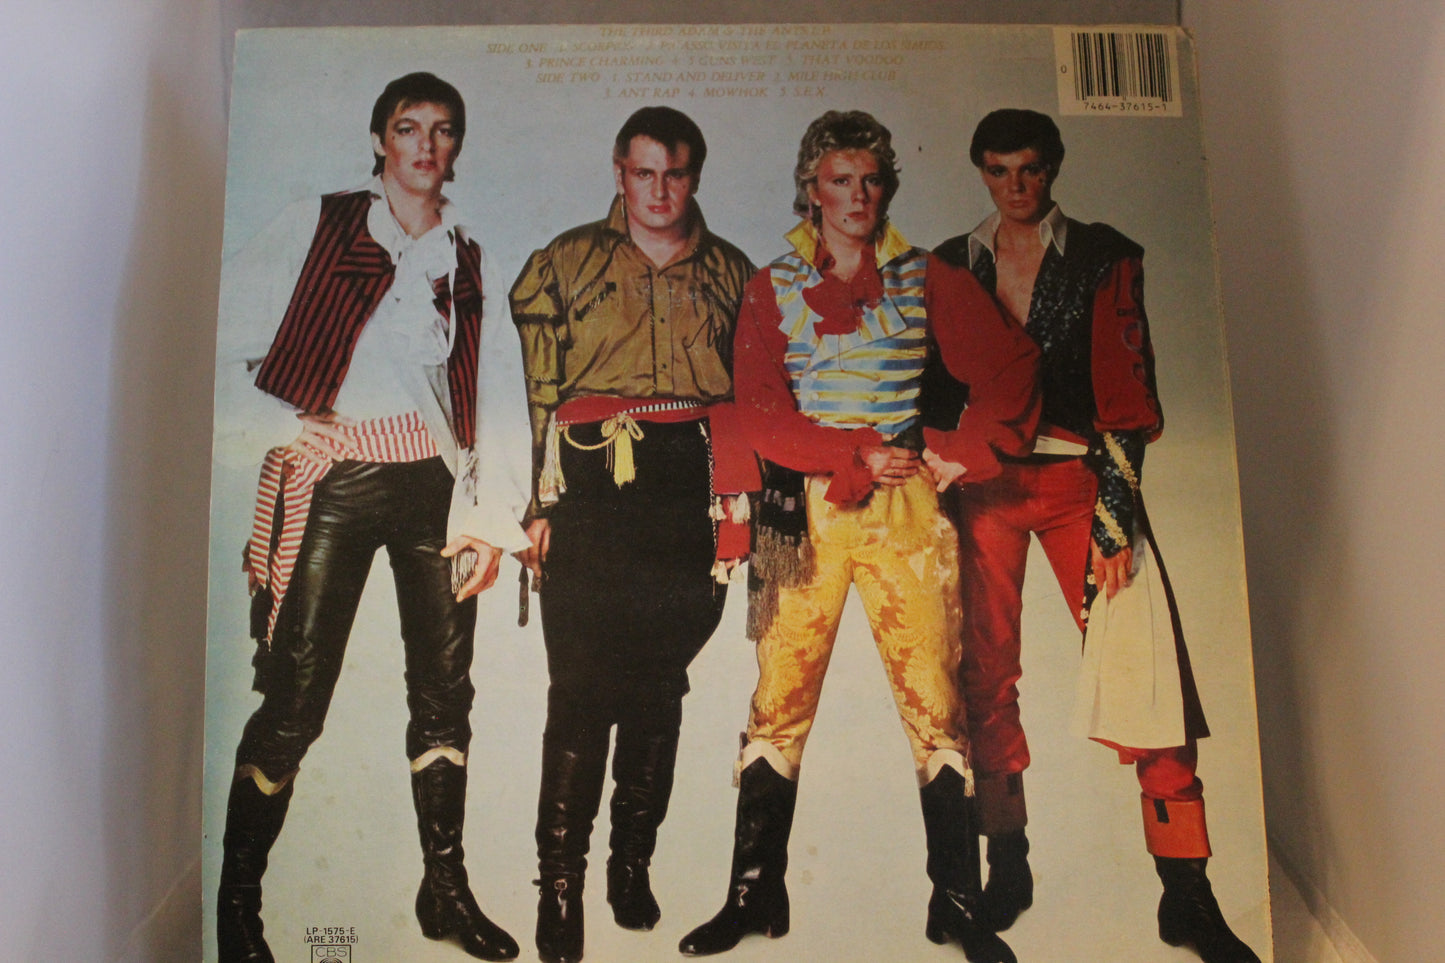 Adam and the ants Prince Charming lp-levy